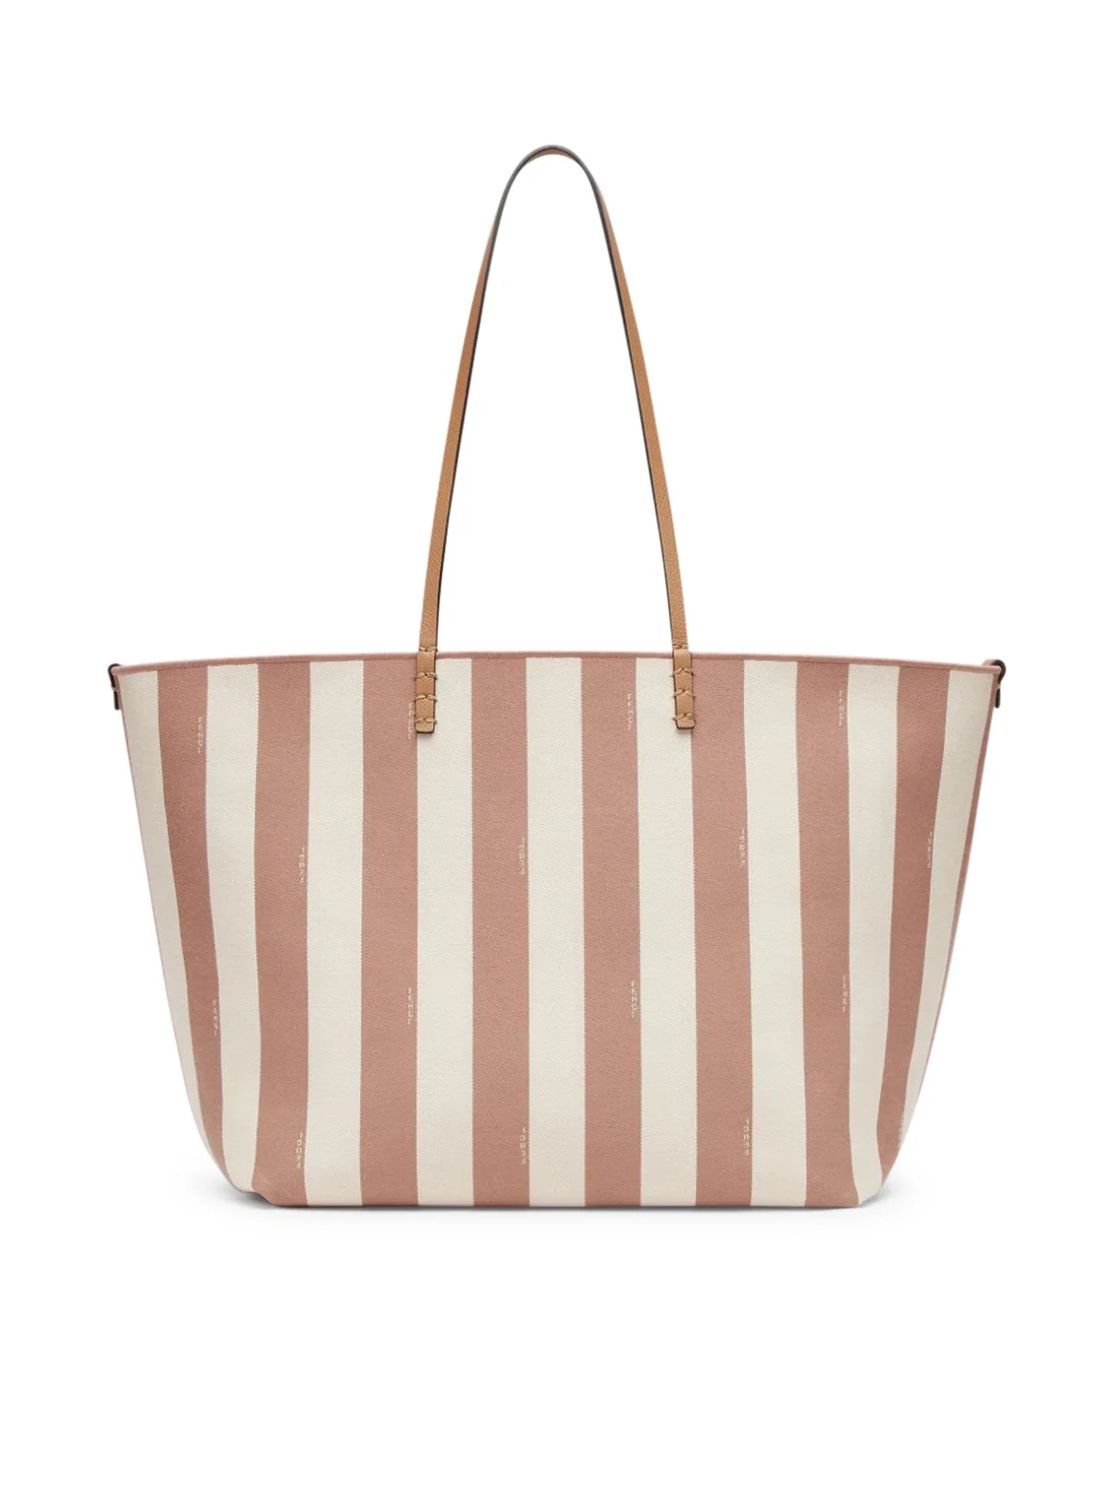 FENDI Tan Striped Reversible Large Tote with Leather Details and Gold-Tone Accents